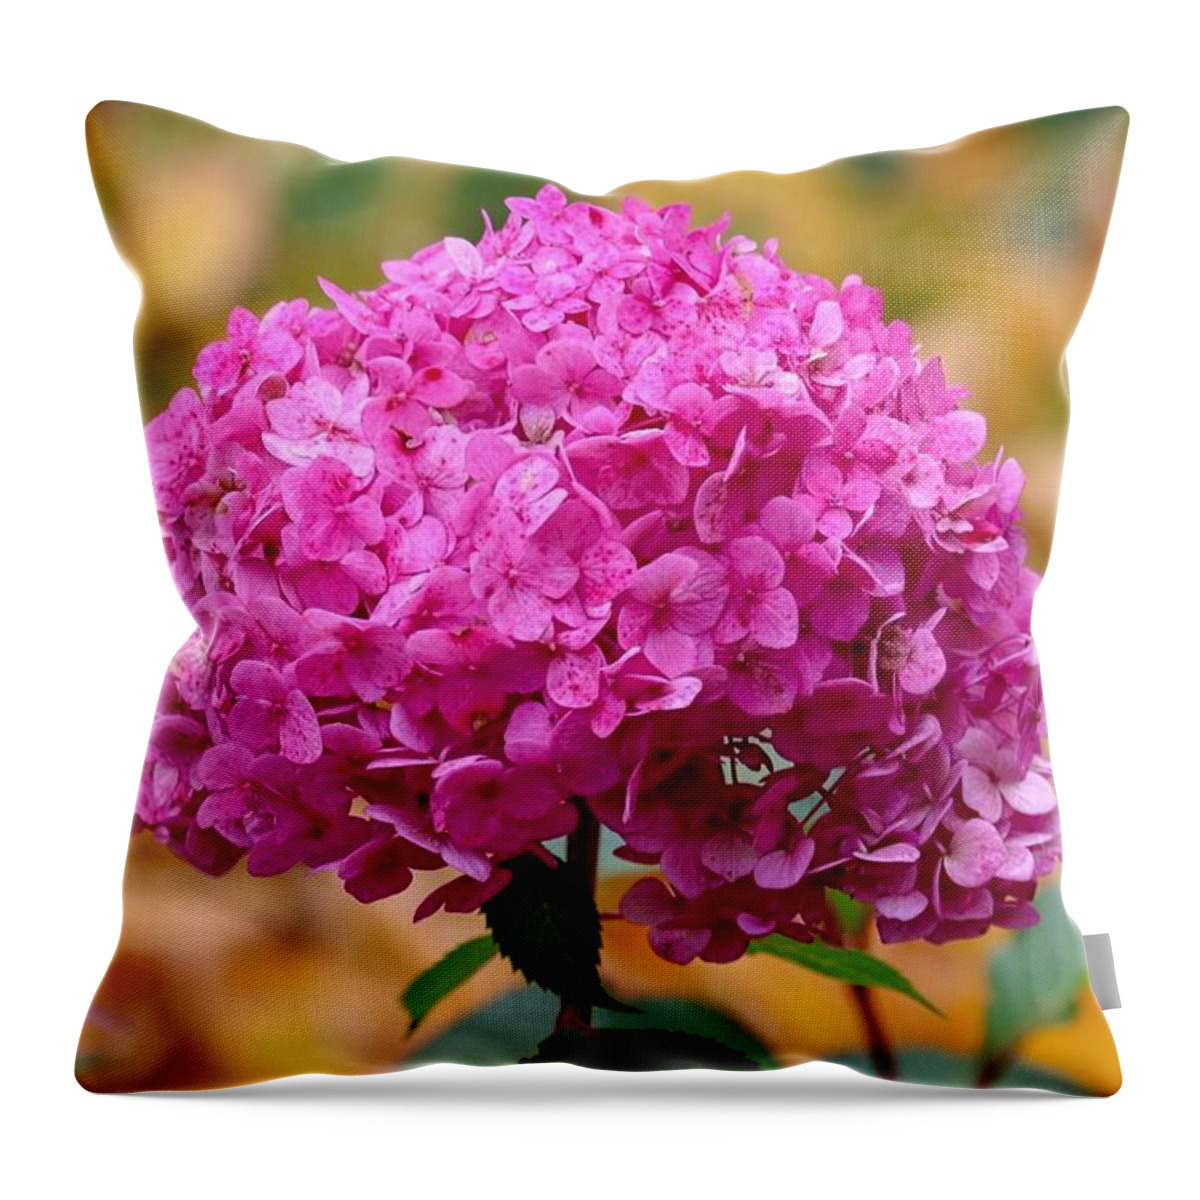 Close-up Throw Pillow featuring the photograph Pink Bouquet by Susan Rydberg